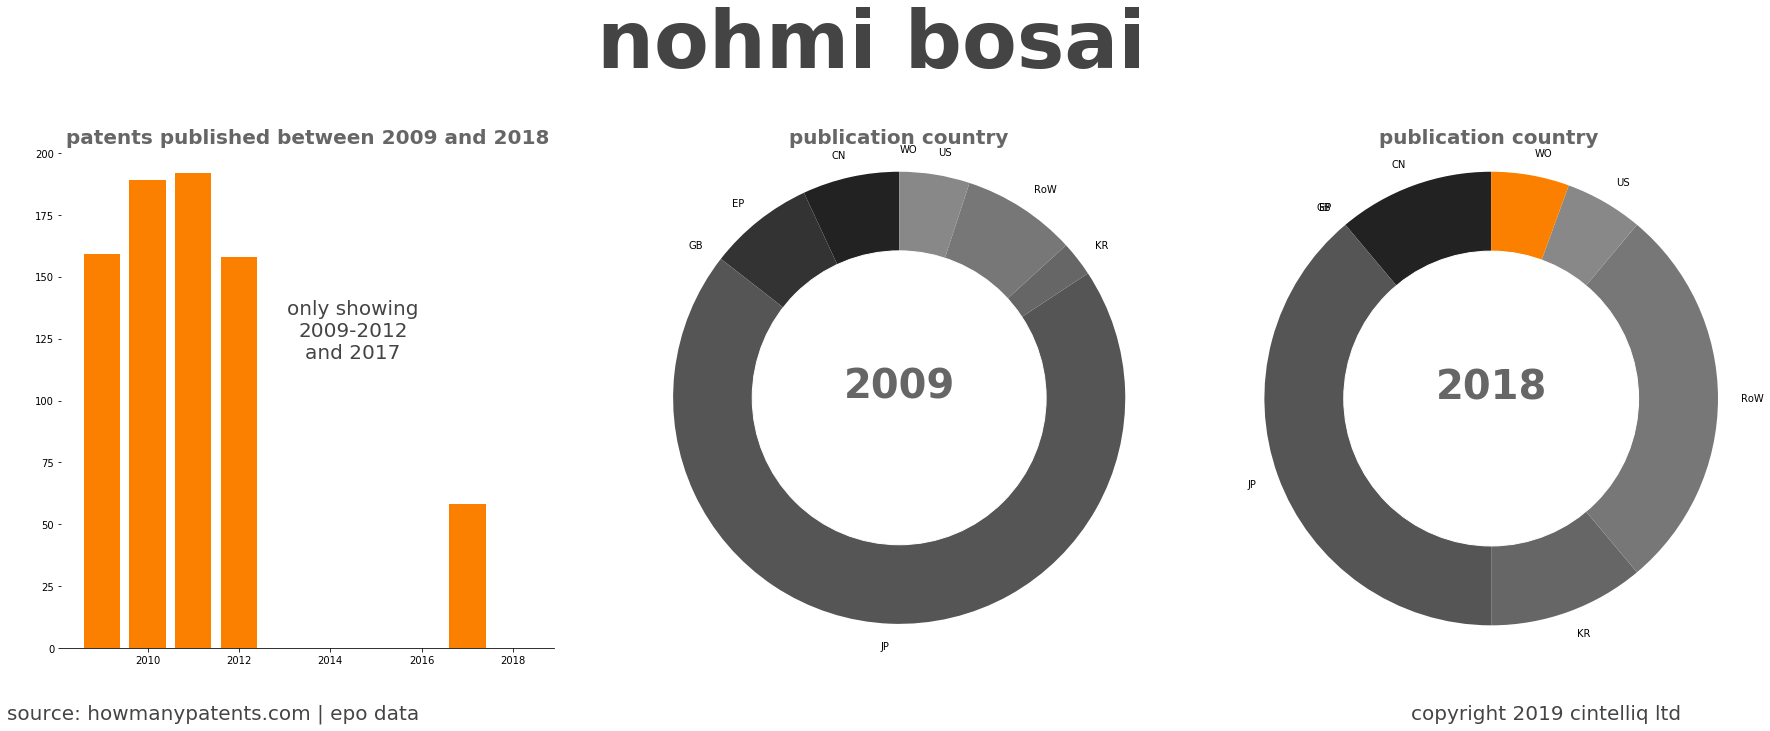 summary of patents for Nohmi Bosai